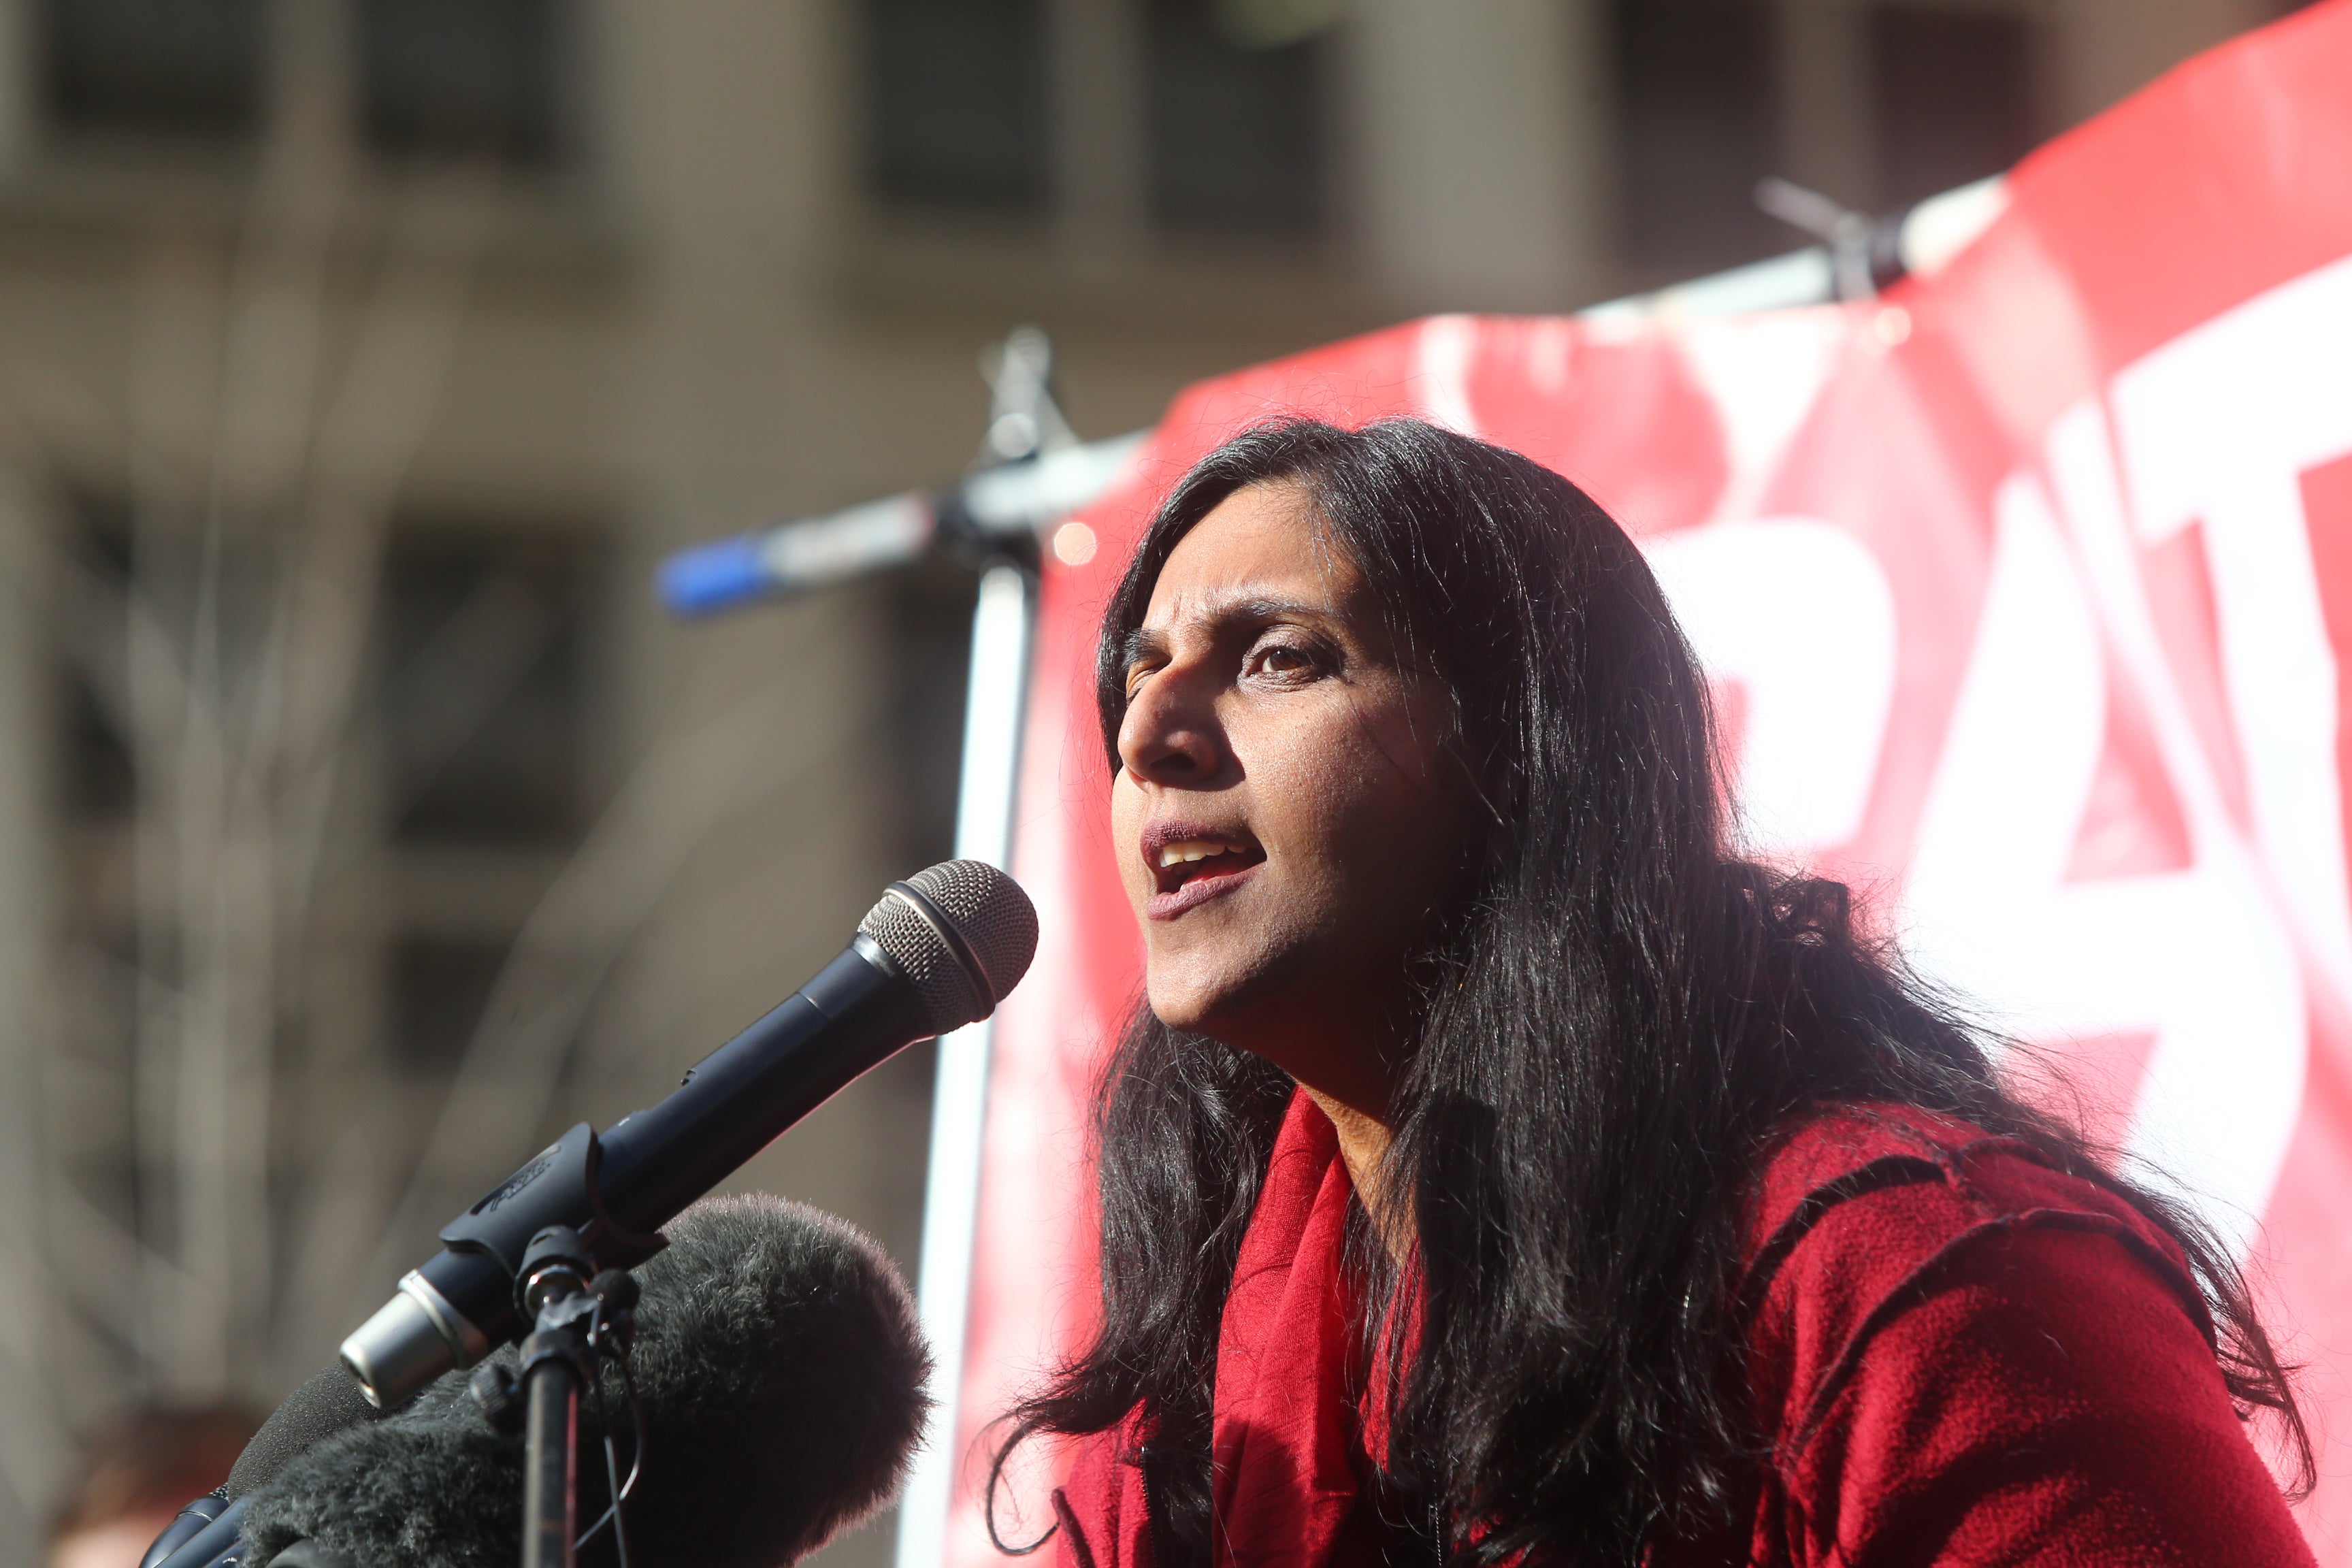 Kshama Sawant says ‘it appeared that working people may have prevailed in this fight’